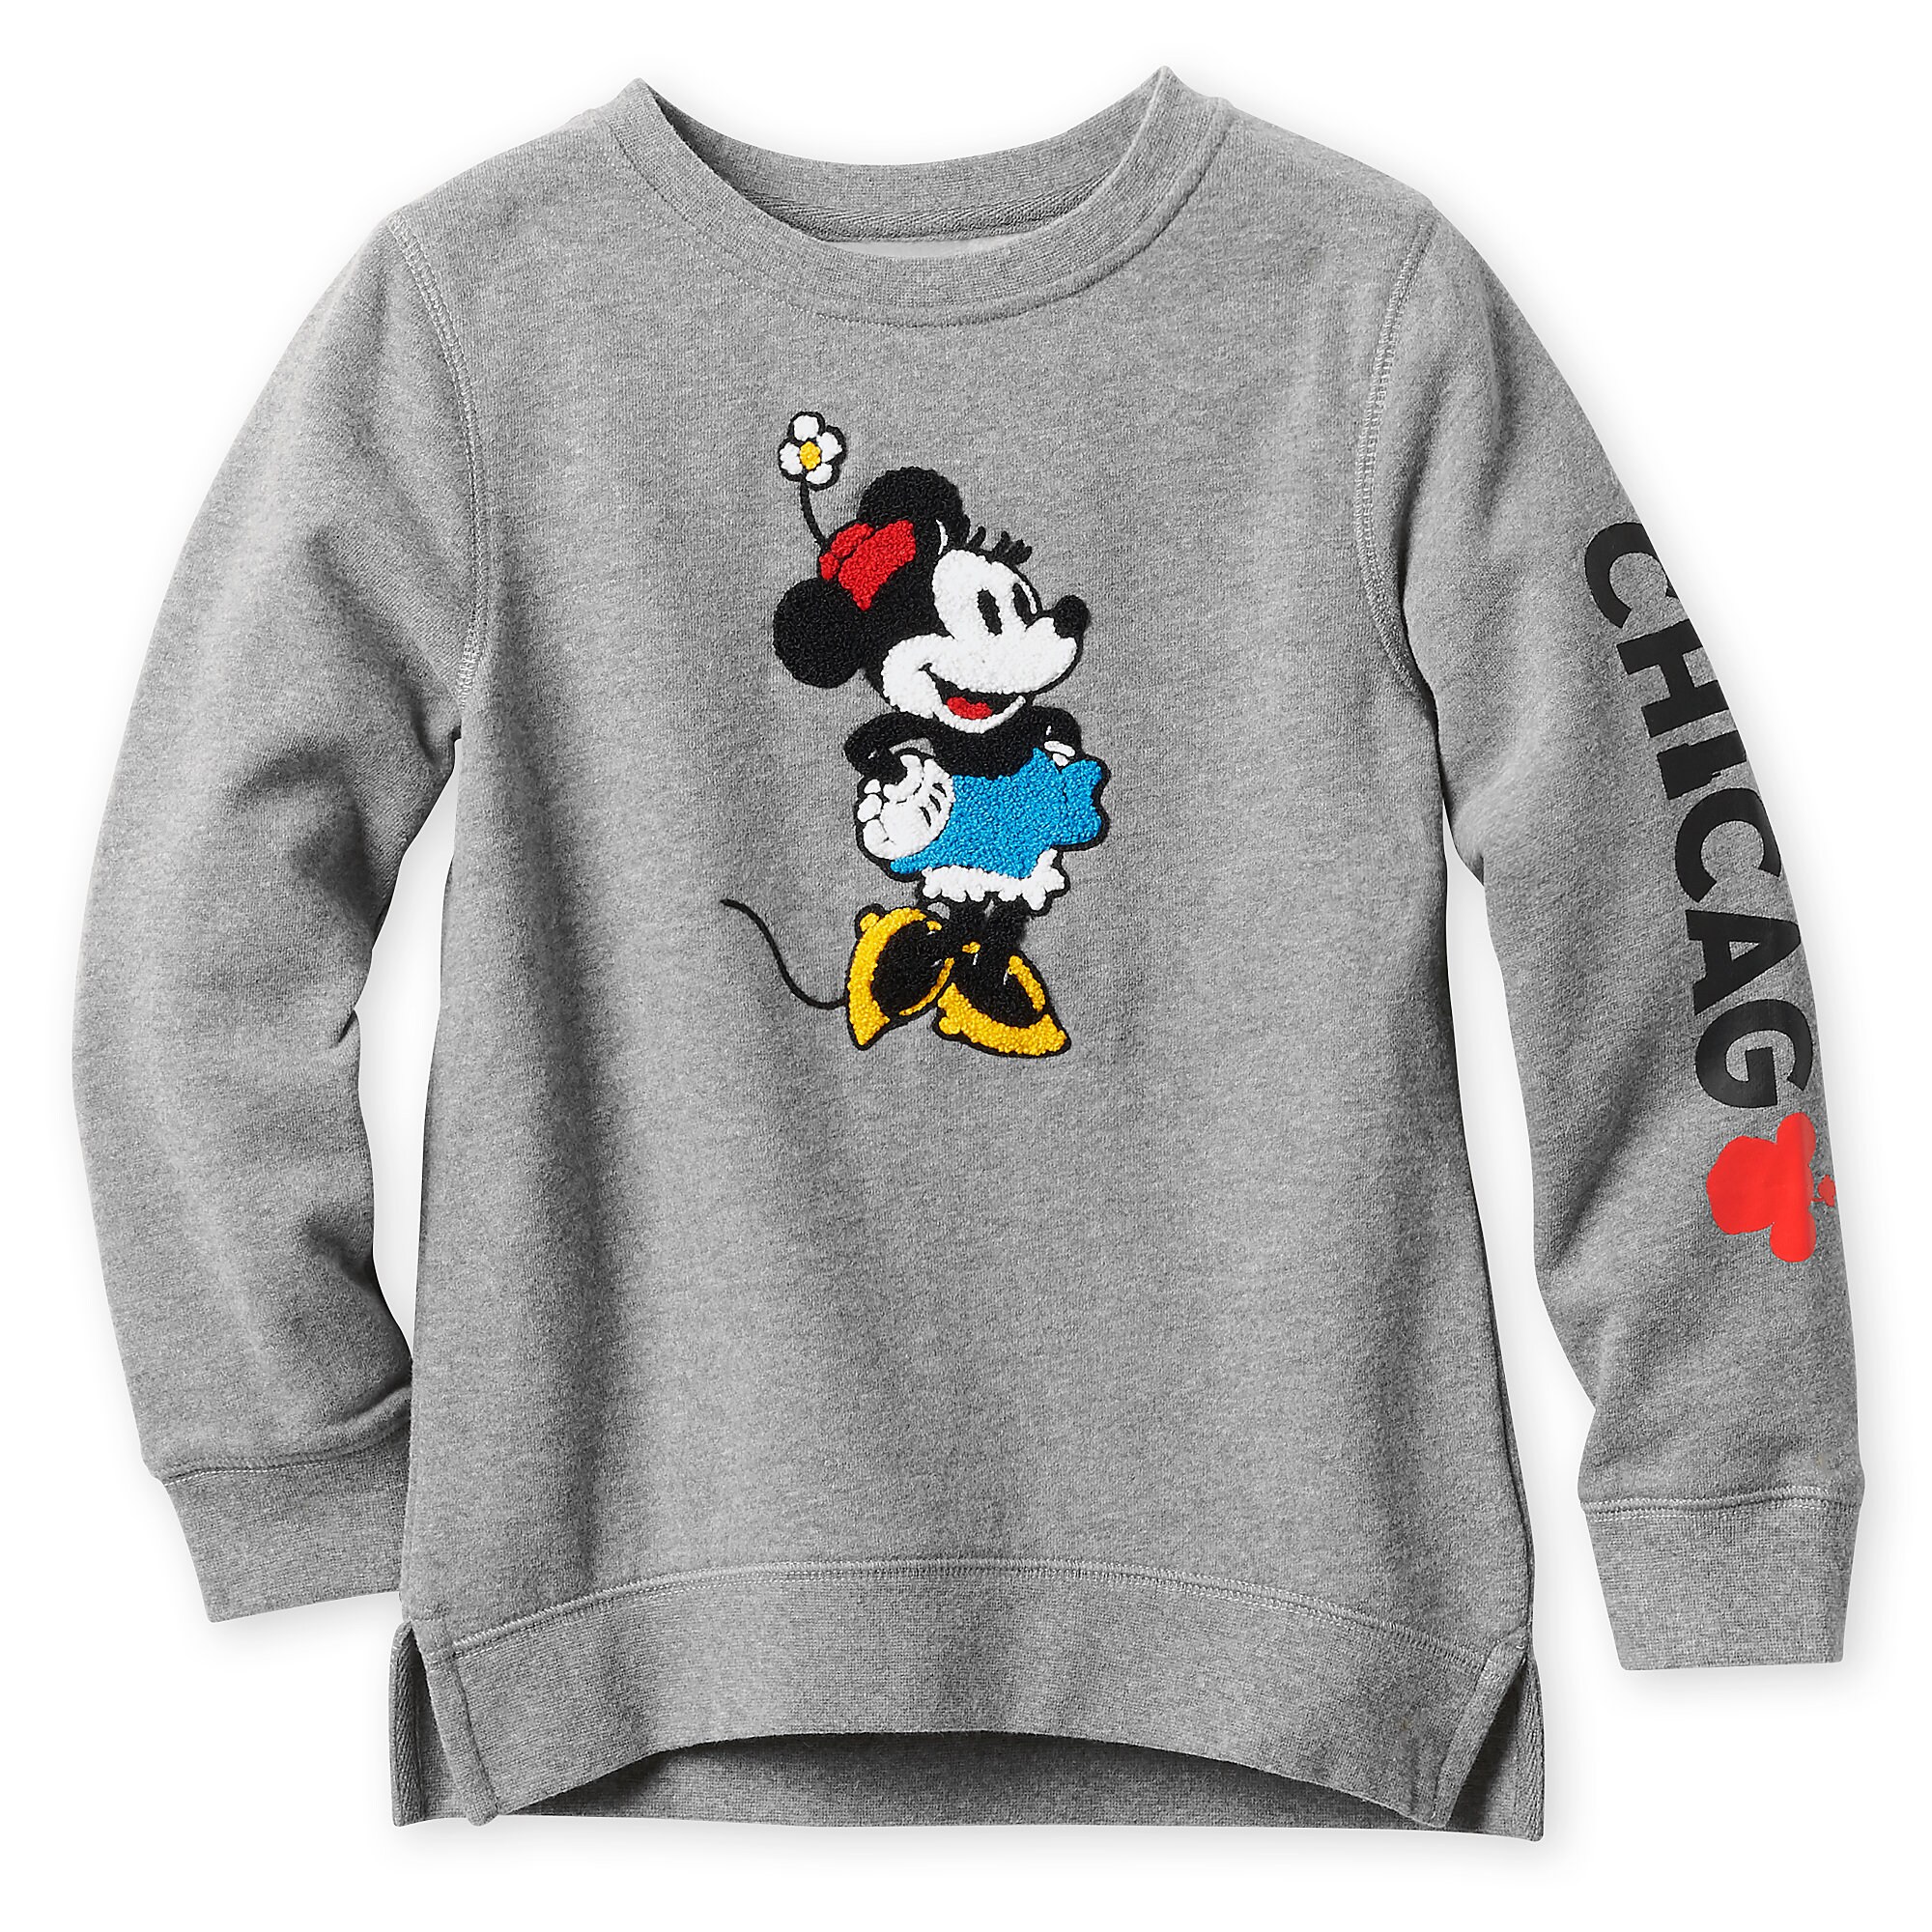 Minnie Mouse Sweatshirt for Girls - Chicago